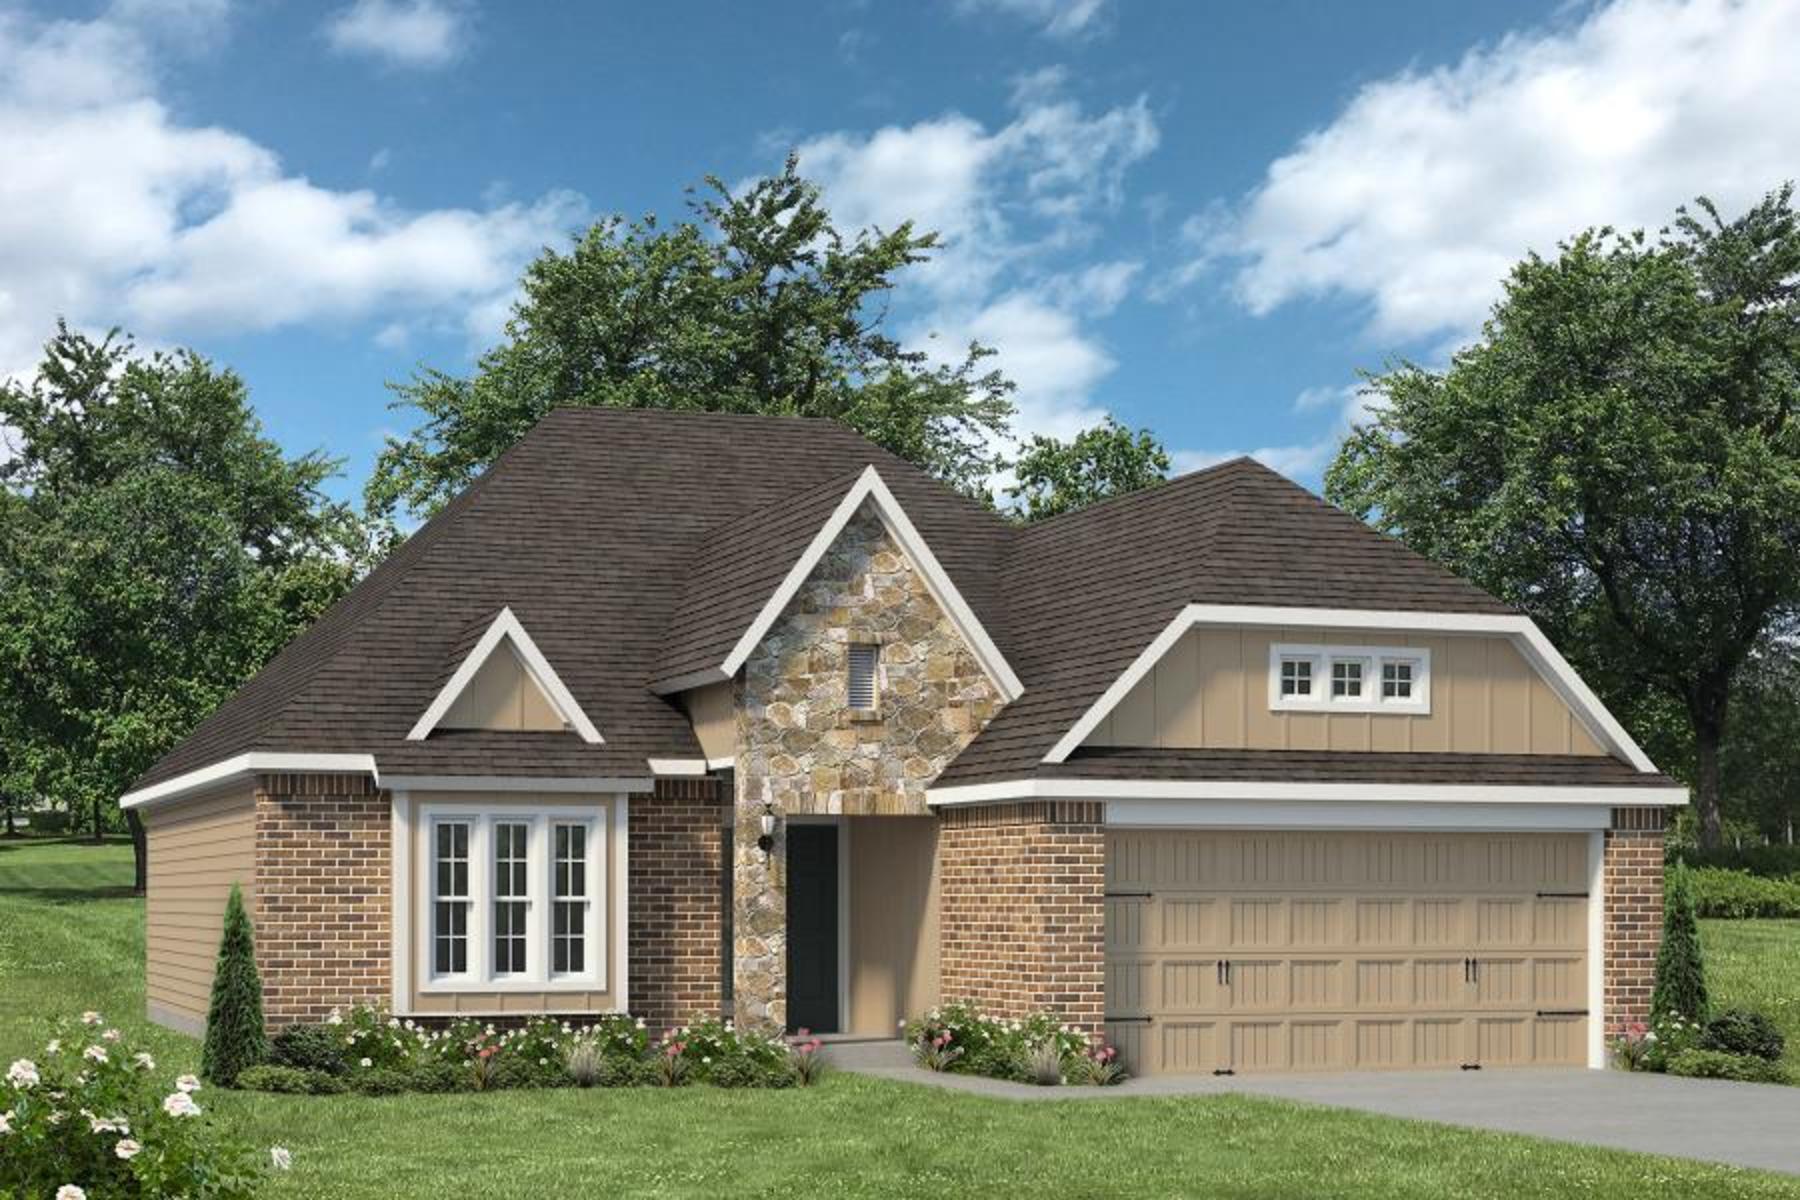 https://myhome.anewgo.com/client/stylecraft/community/Build%20On%20Your%20Lot/plan/1613%20%7C%20Blakely%20Classic?elevId=53. Blakely Home with 3 Bedrooms